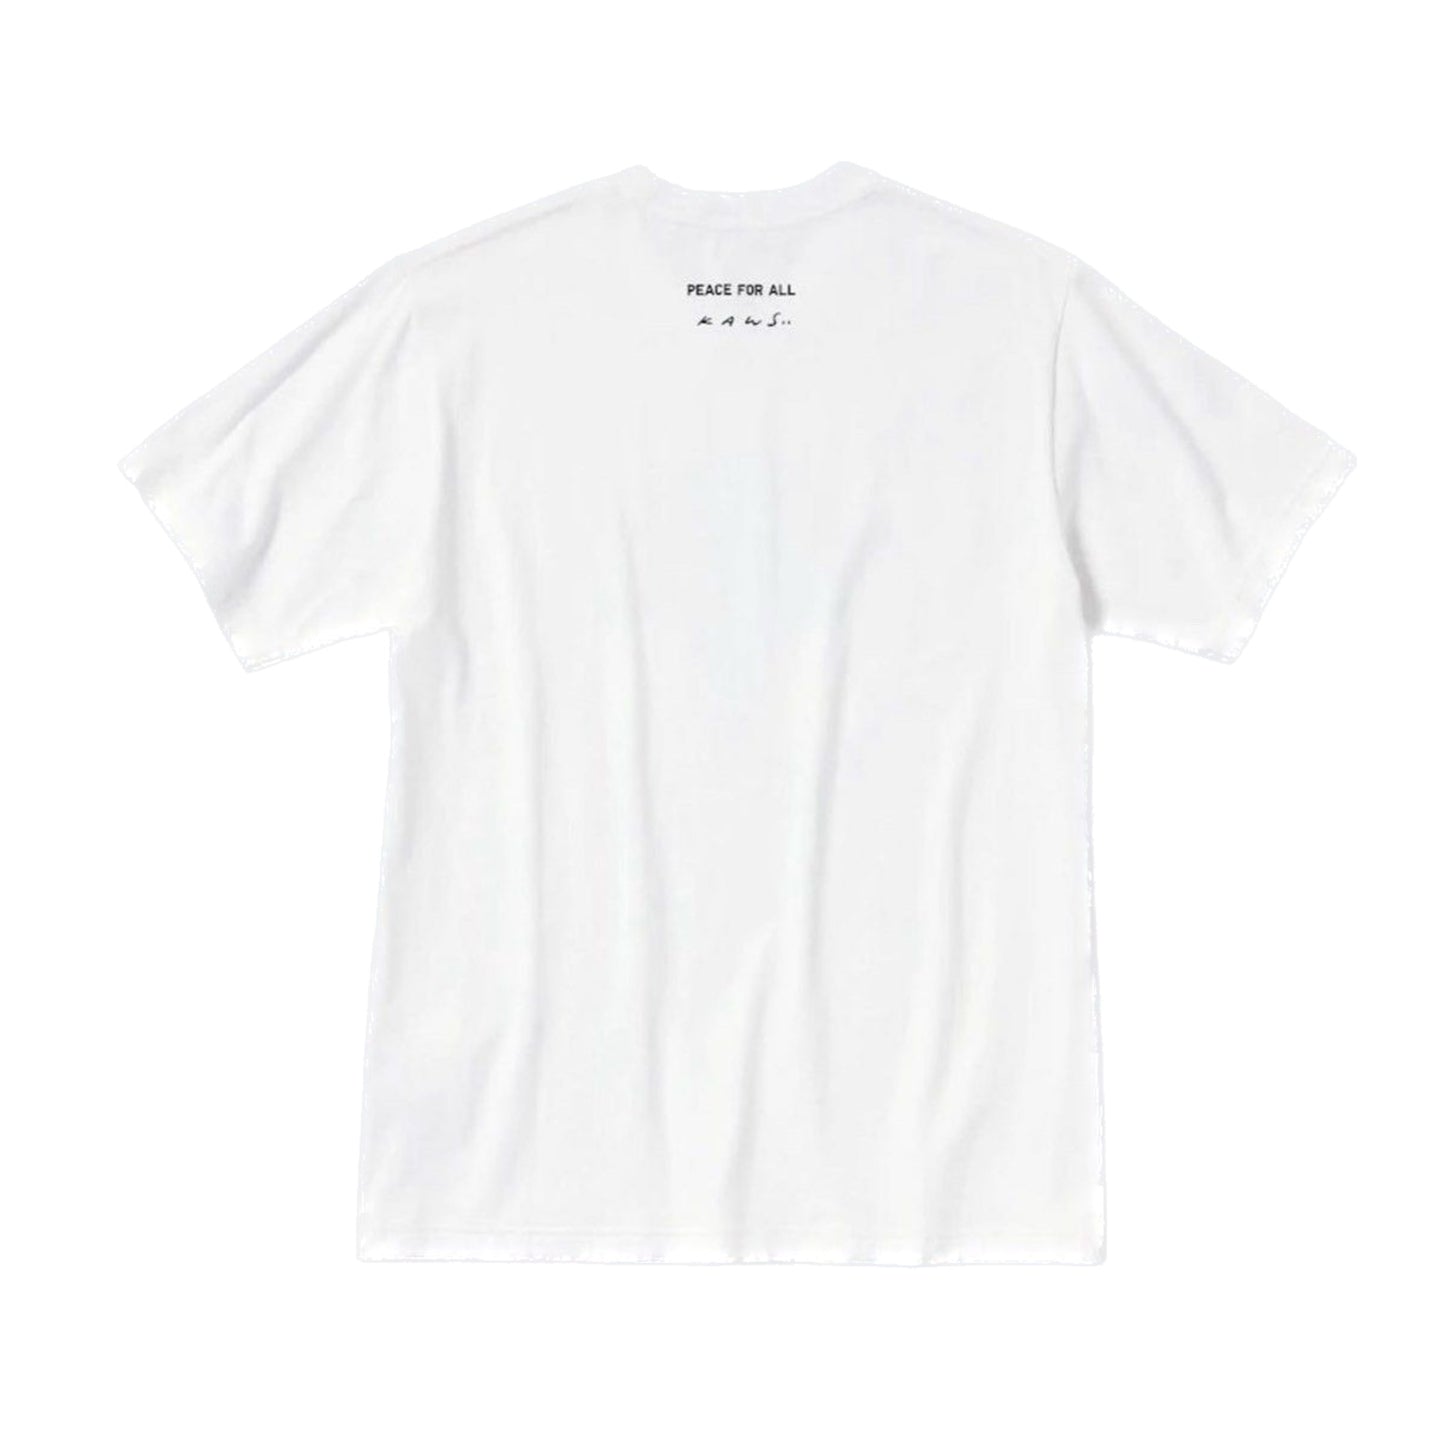 KAWS x Uniqlo Peace For All S/S Graphic T-Shirt (Asia Sizing)